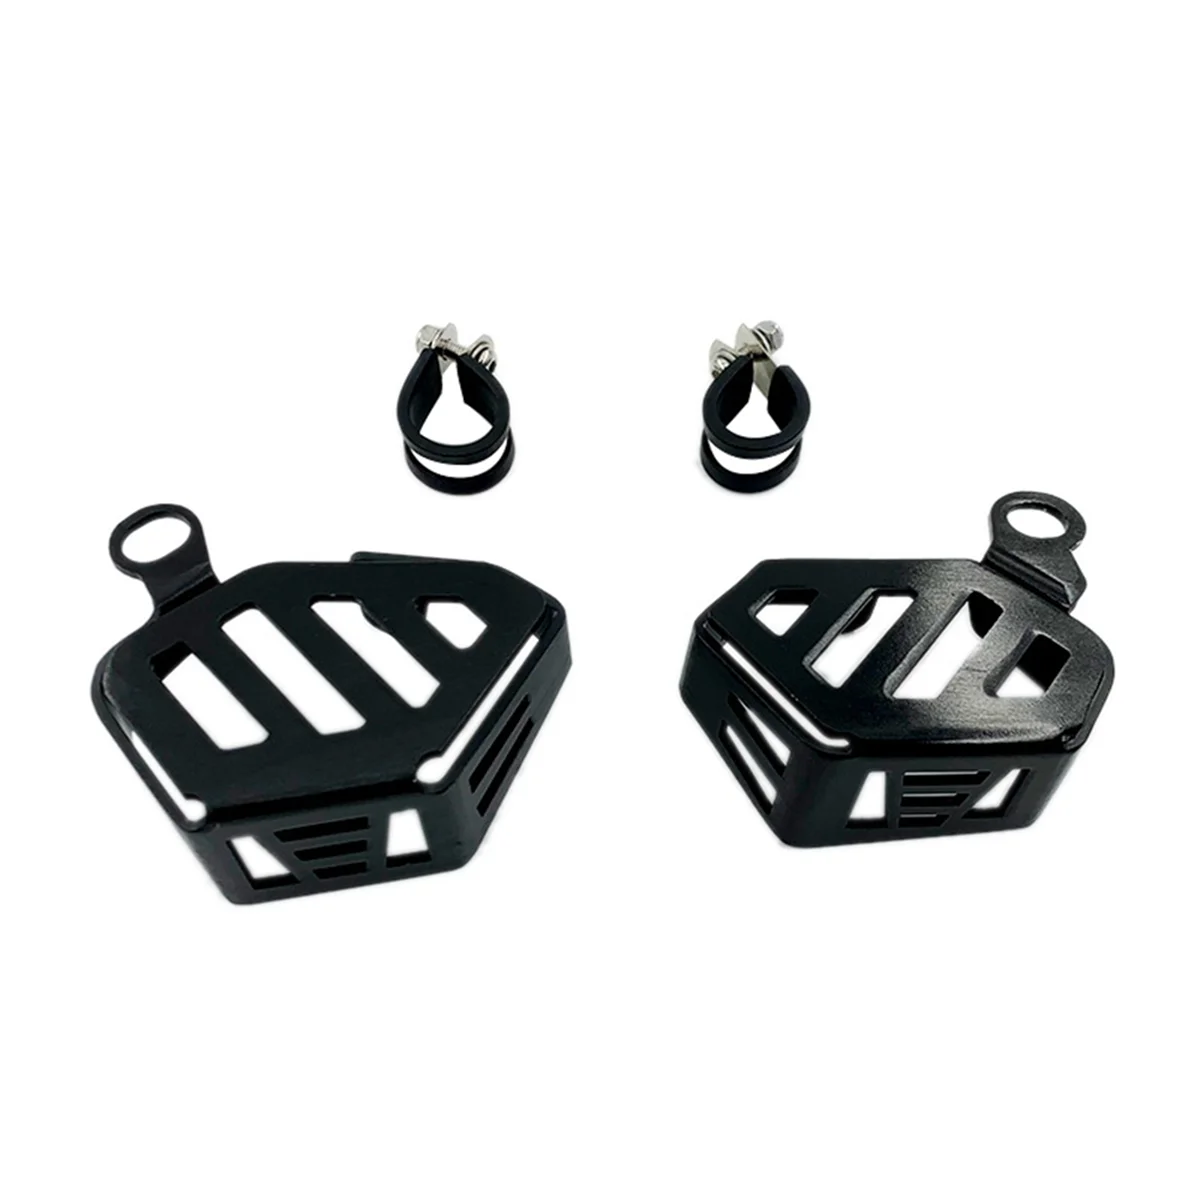 

Front Brake Reservoir Clutch Oil Cup Guard Protector Cover for BMW R1250GS R 1250GS LC Adventure R R1200GS ADV 2019-2022